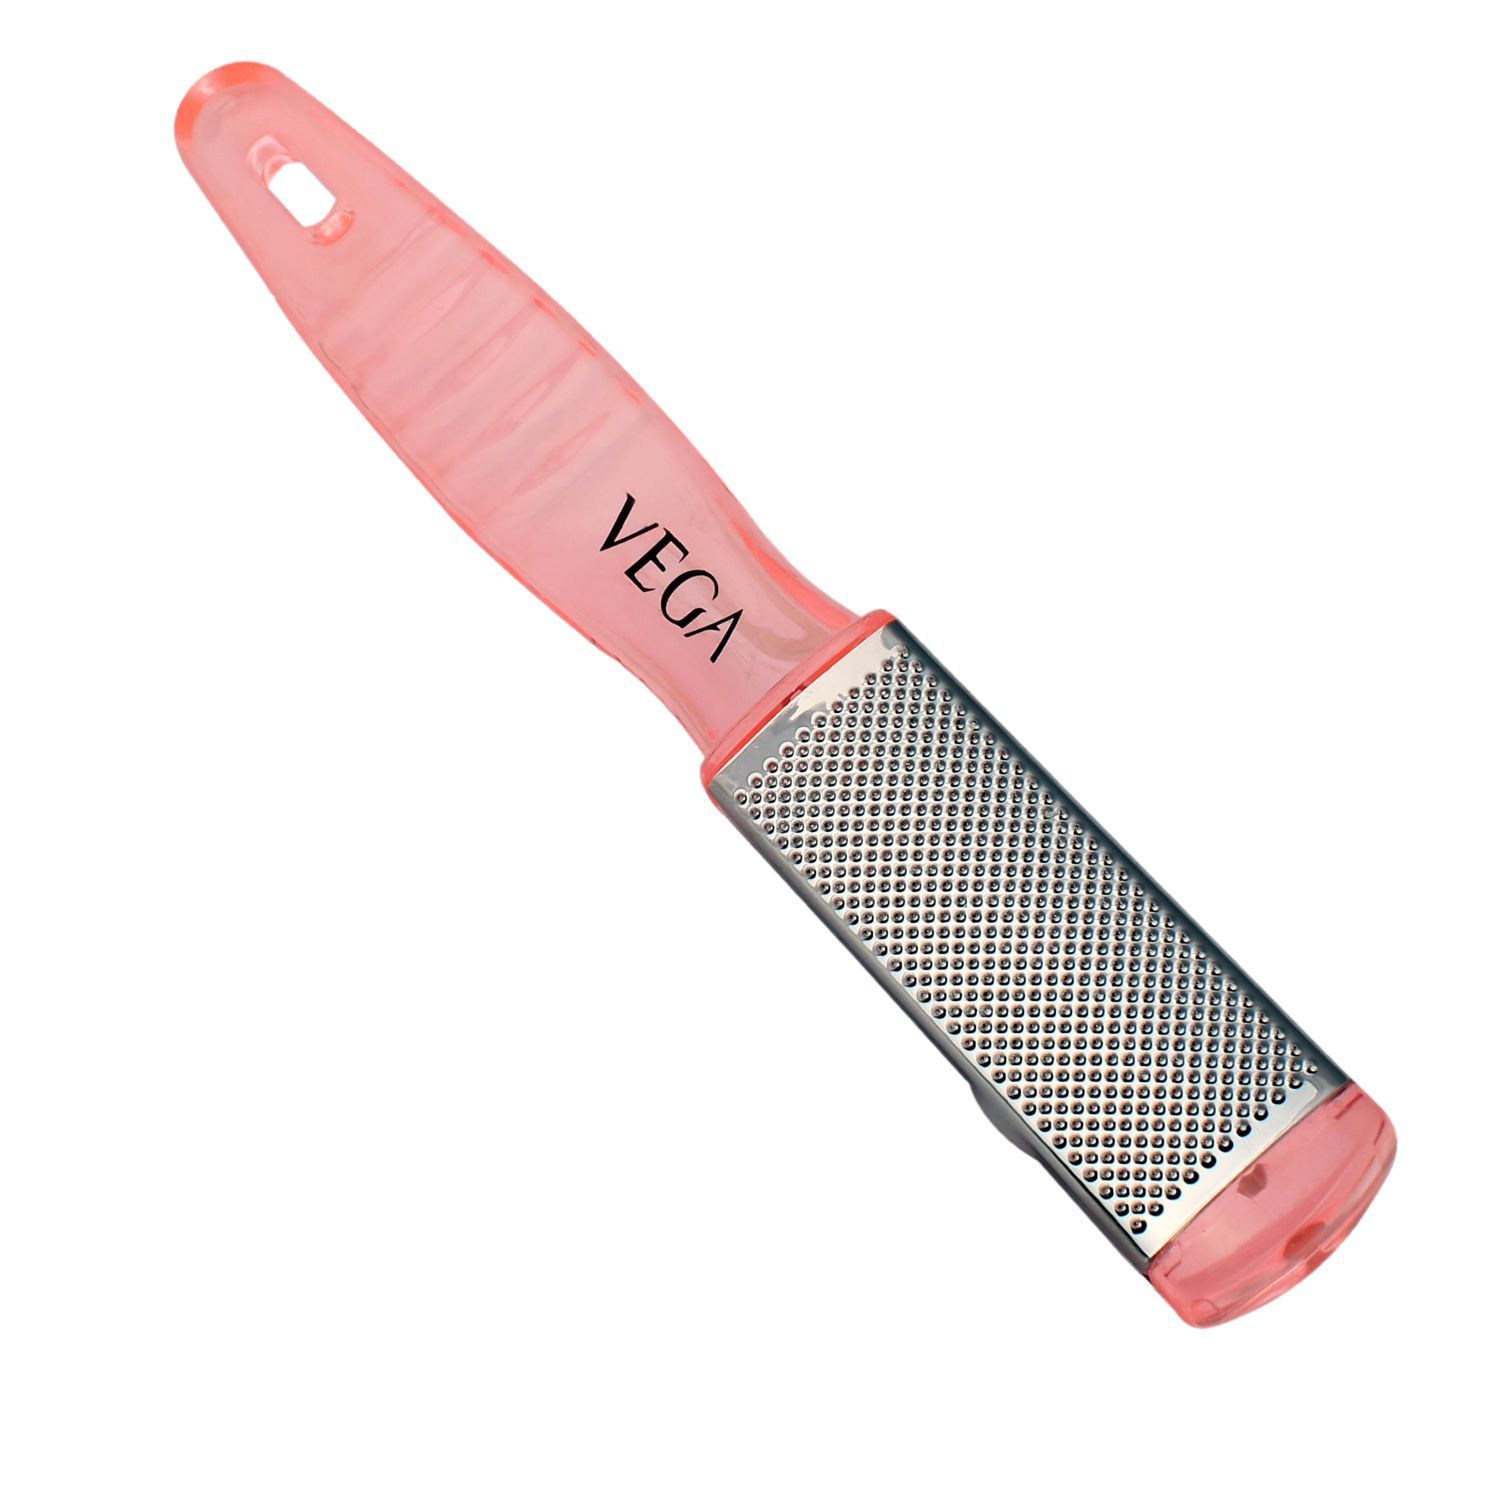 VEGA Pedicure File - (PD-03) (Color May Vary)